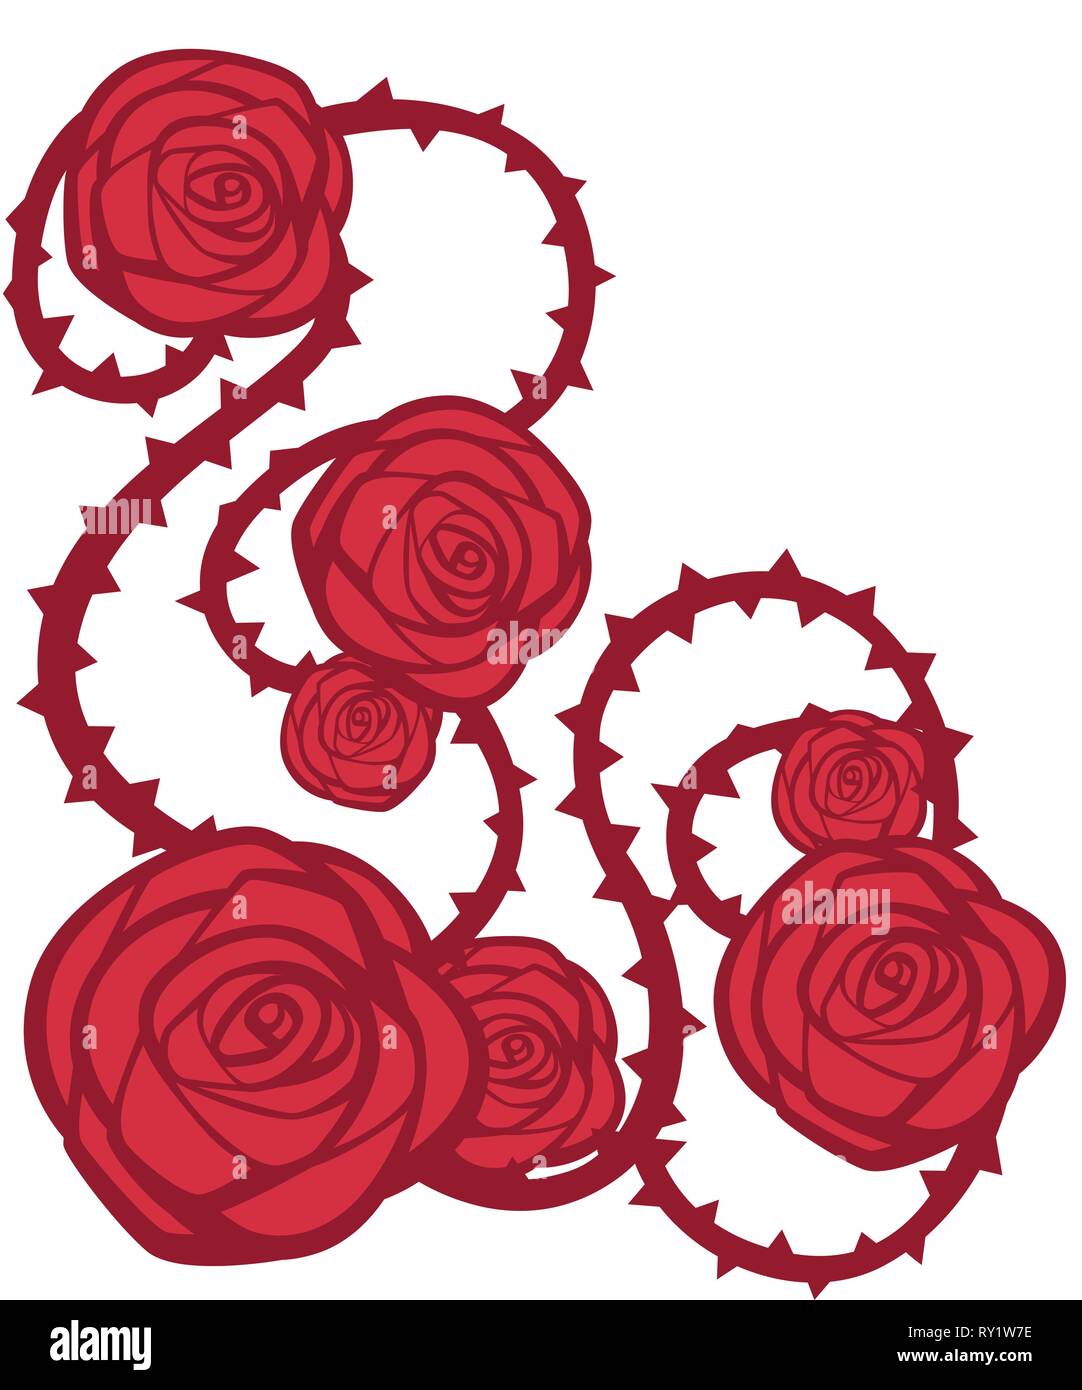 Pattern of red rose with thorns. Floral greetings card design. Flat vector illustration on white background. Stock Vector